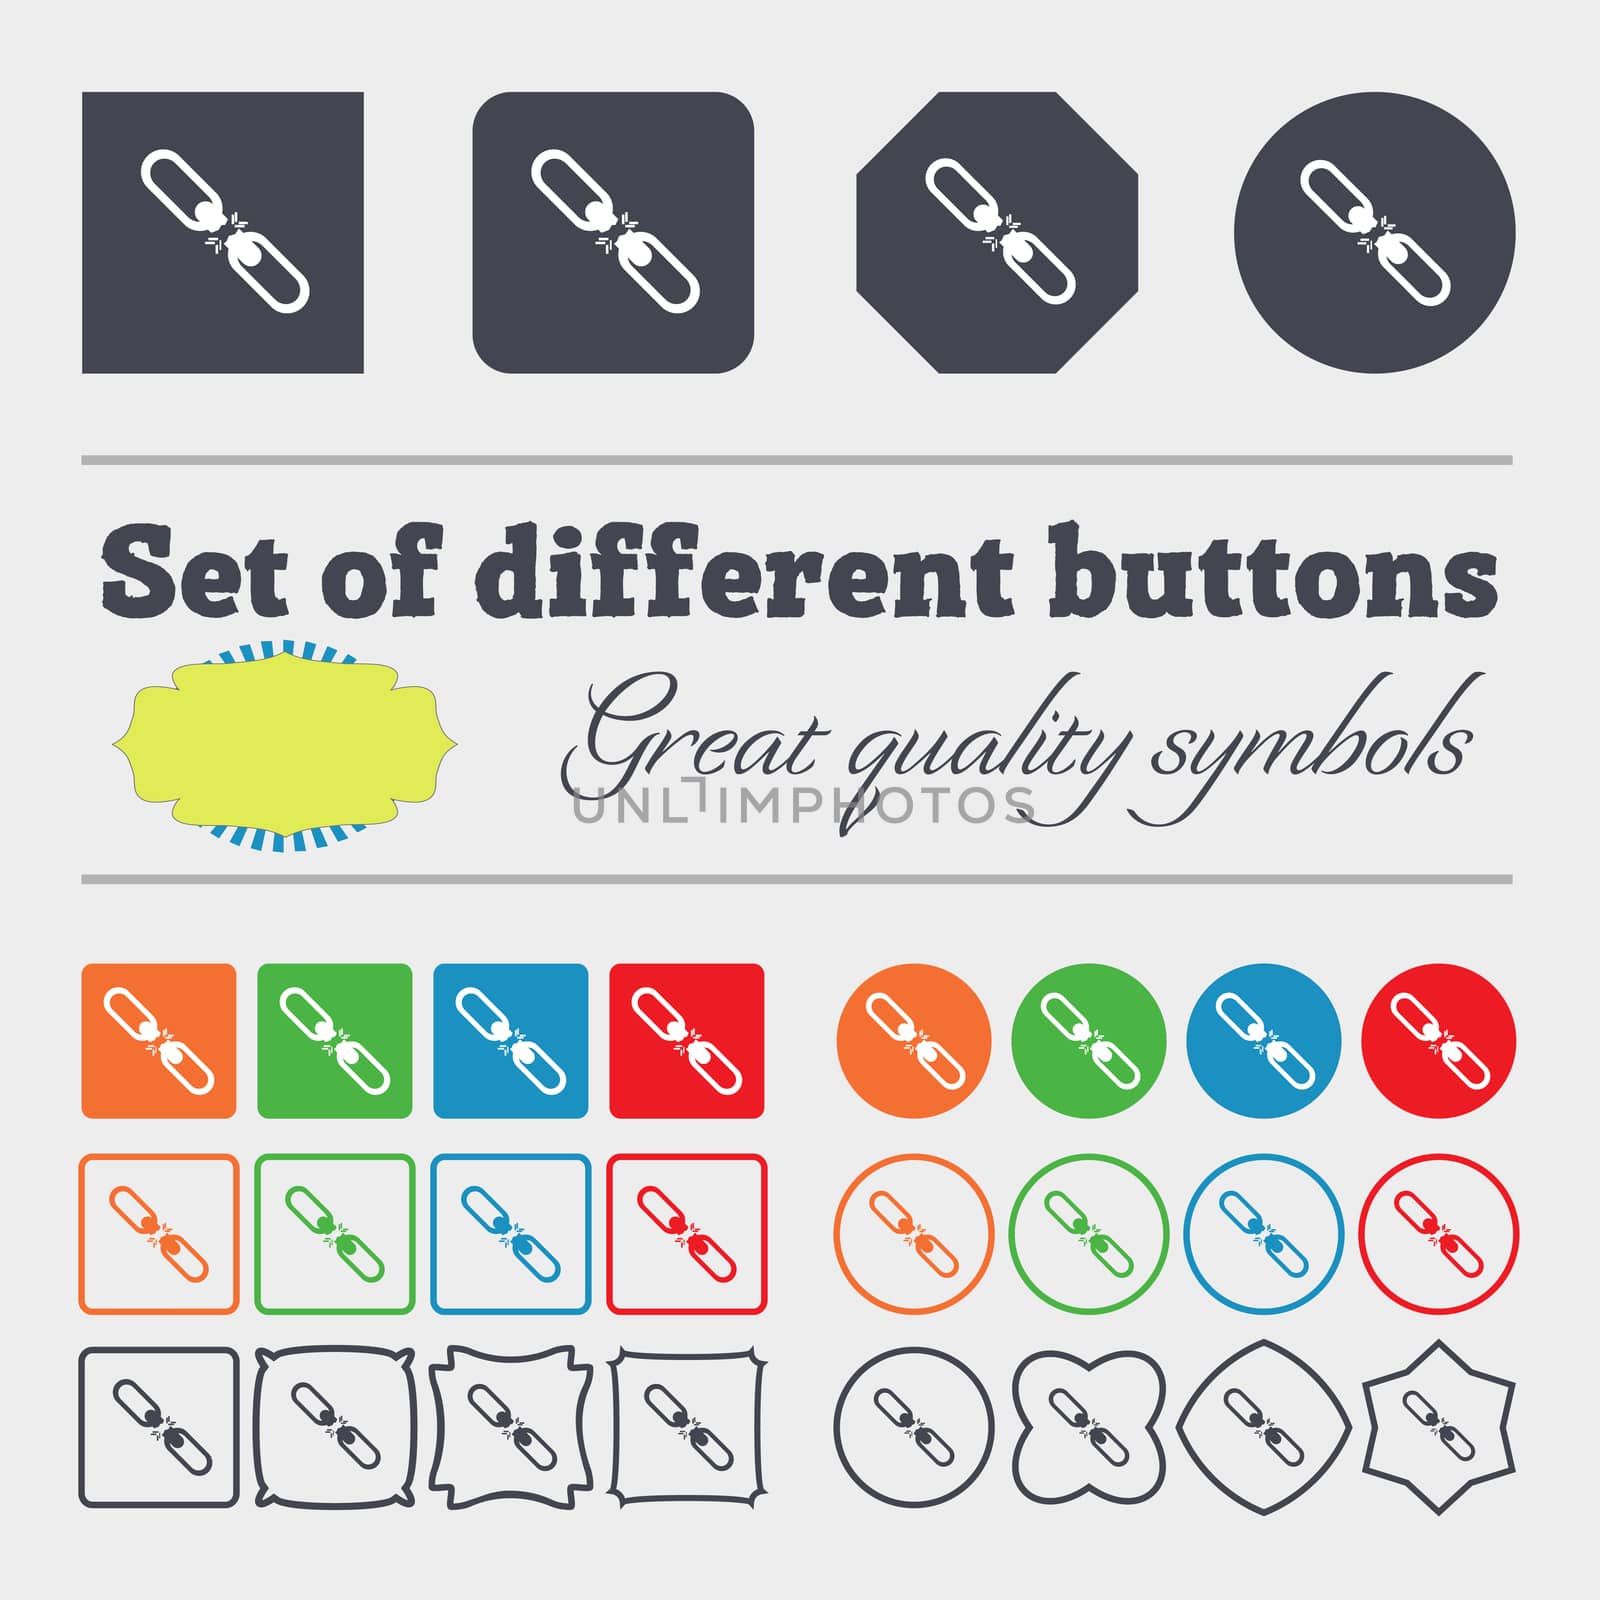 Broken connection flat single icon. Big set of colorful, diverse, high-quality buttons. illustration